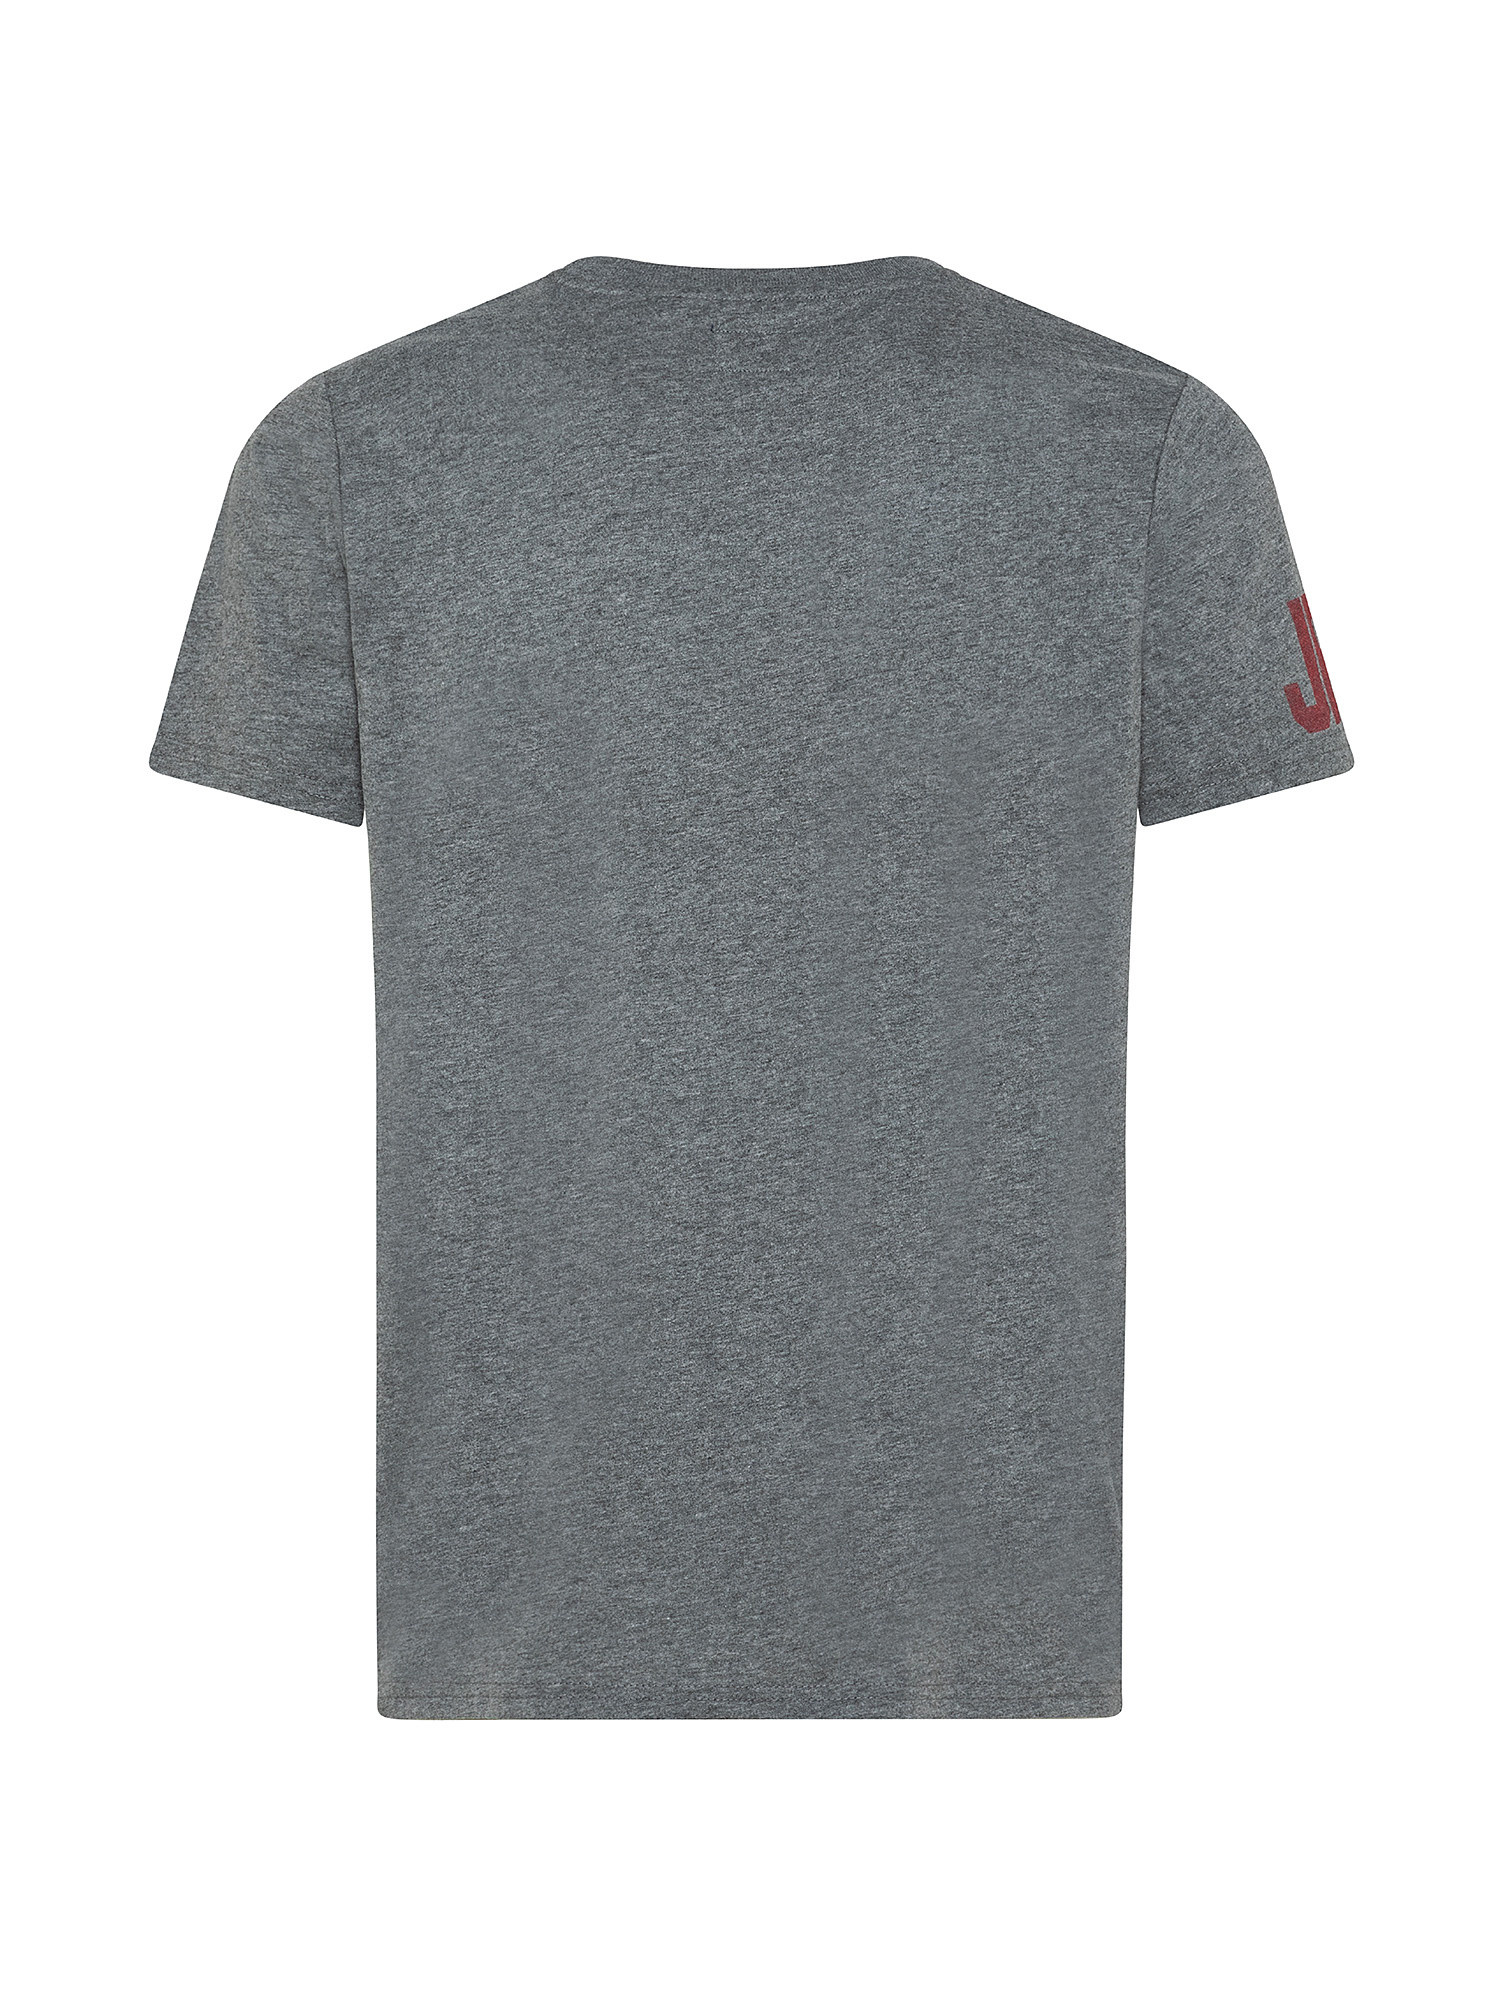 Classic t-shirt with vintage logo, Grey, large image number 1